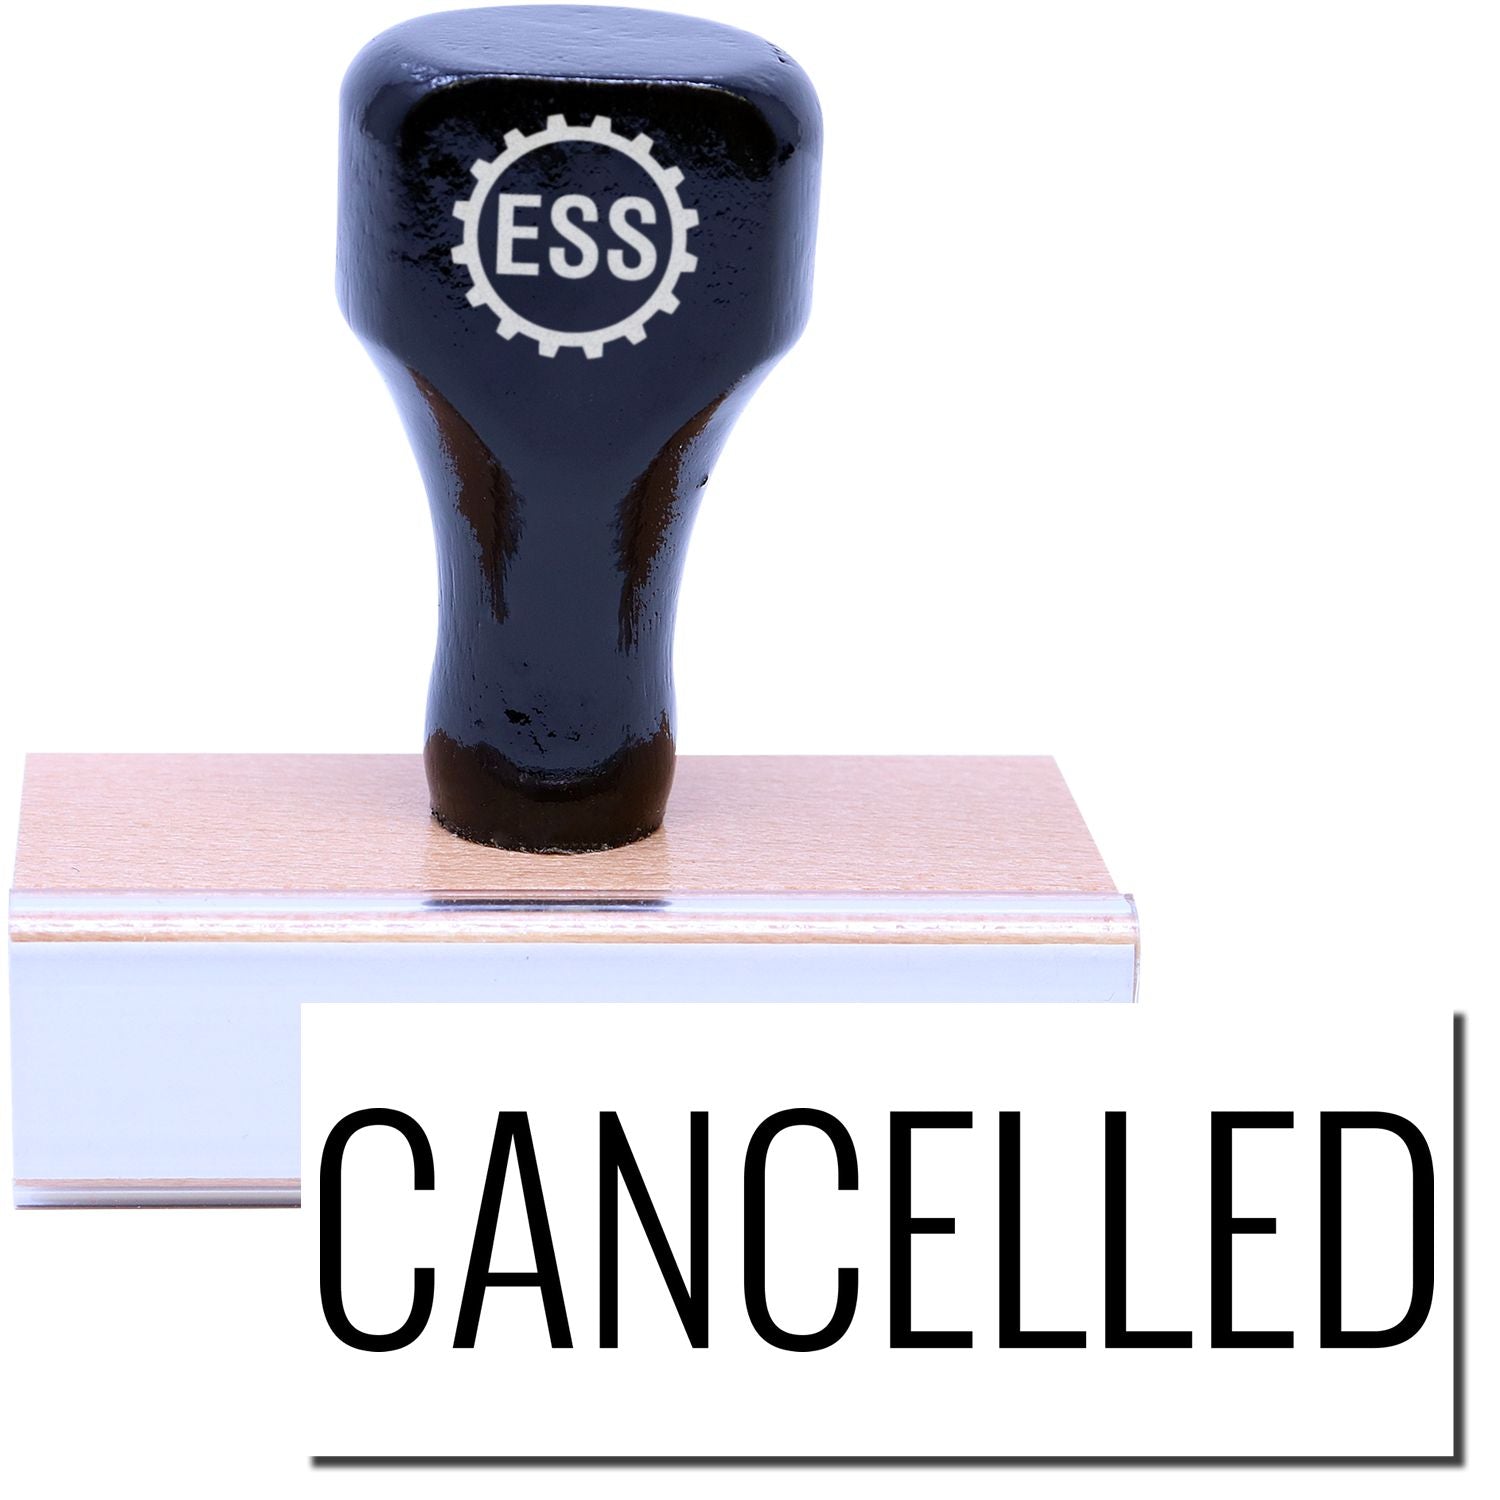 A stock office rubber stamp with a stamped image showing how the text "CANCELLED" in a large narrow font is displayed after stamping.